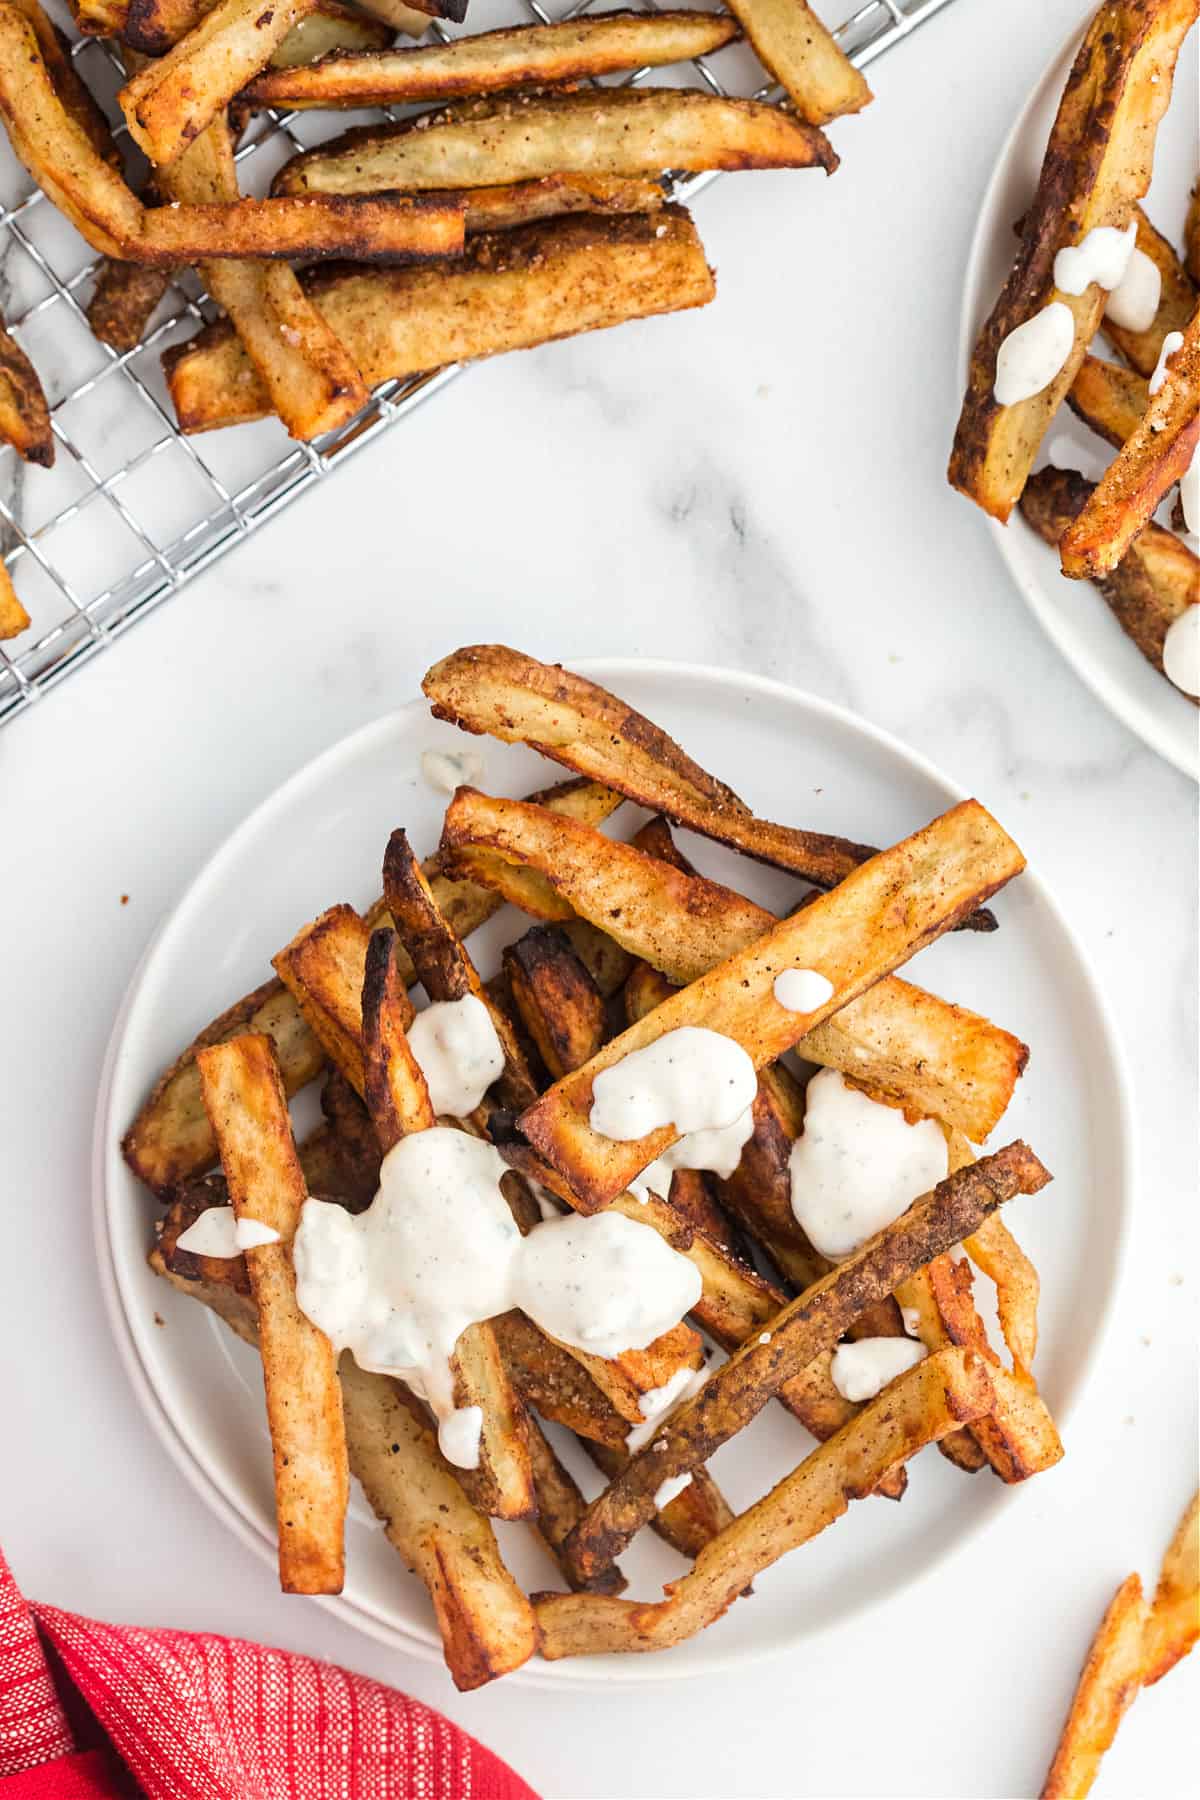 Blue cheese dressing drizzled on a plate of baked french fries.